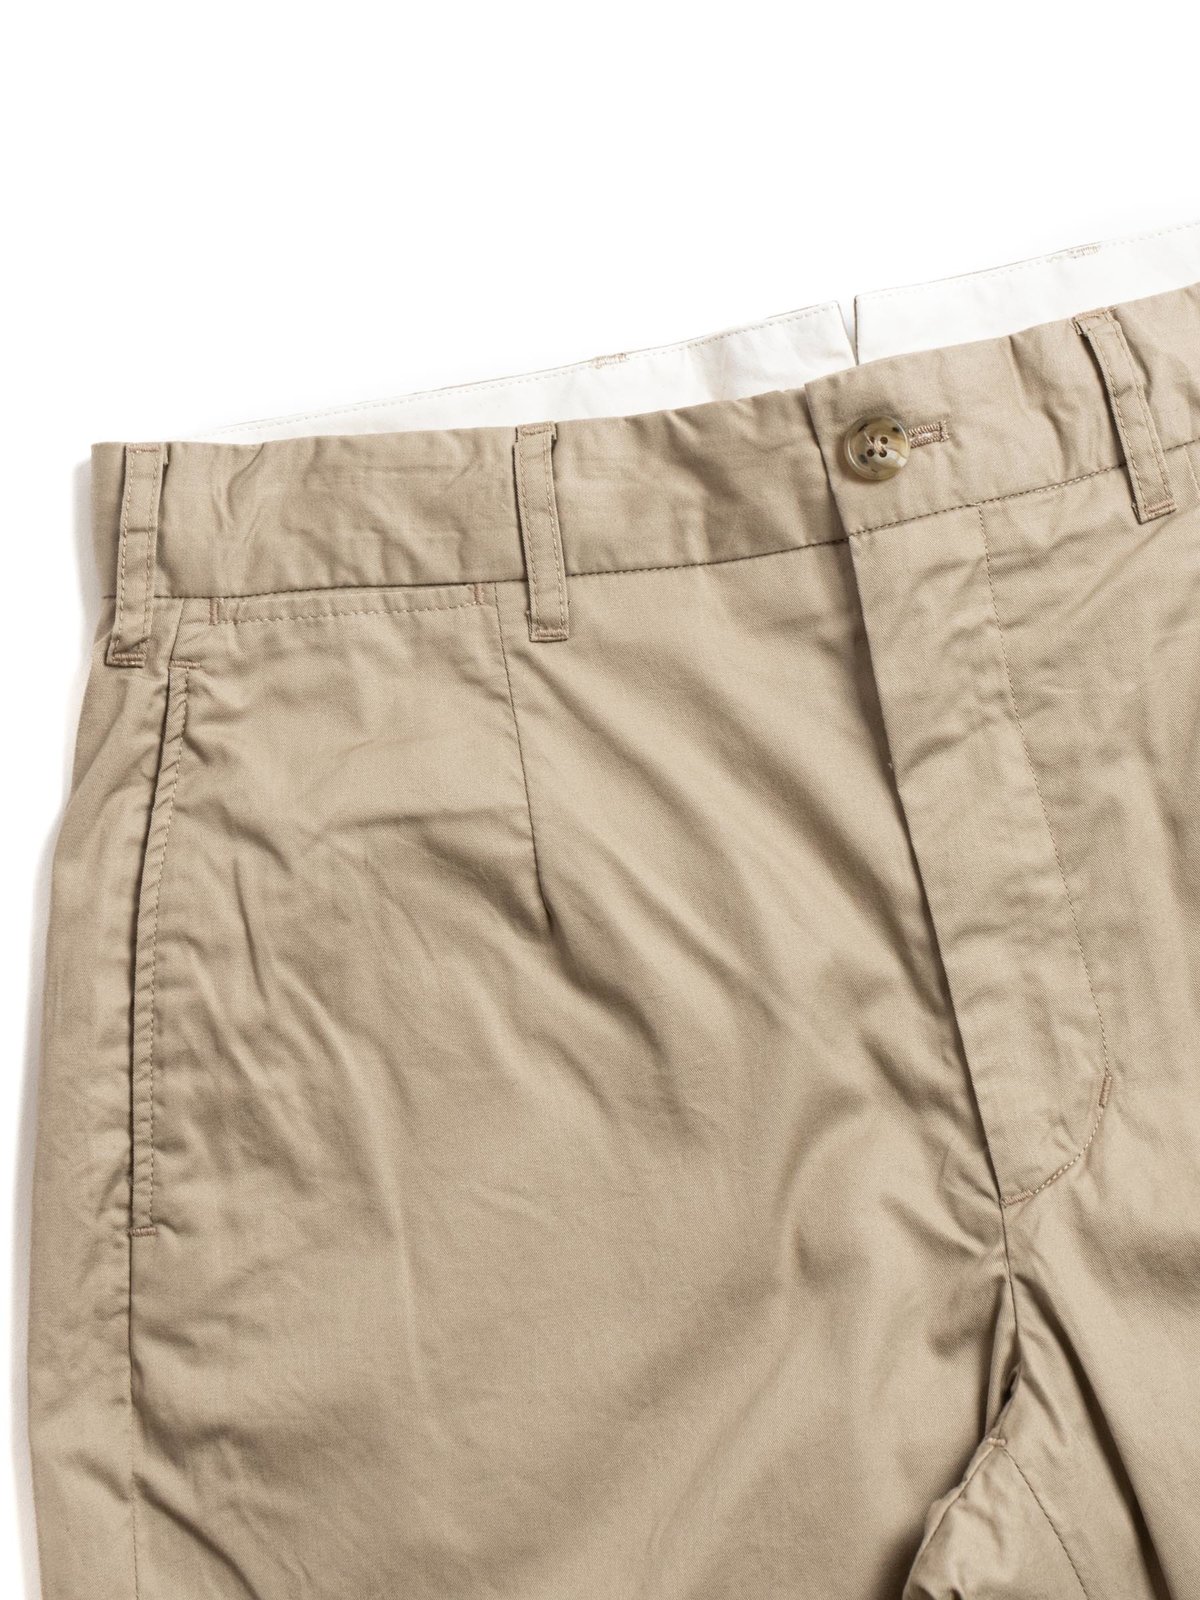 ANDOVER PANT KHAKI HIGH COUNT TWILL by Engineered Garments – The Bureau ...